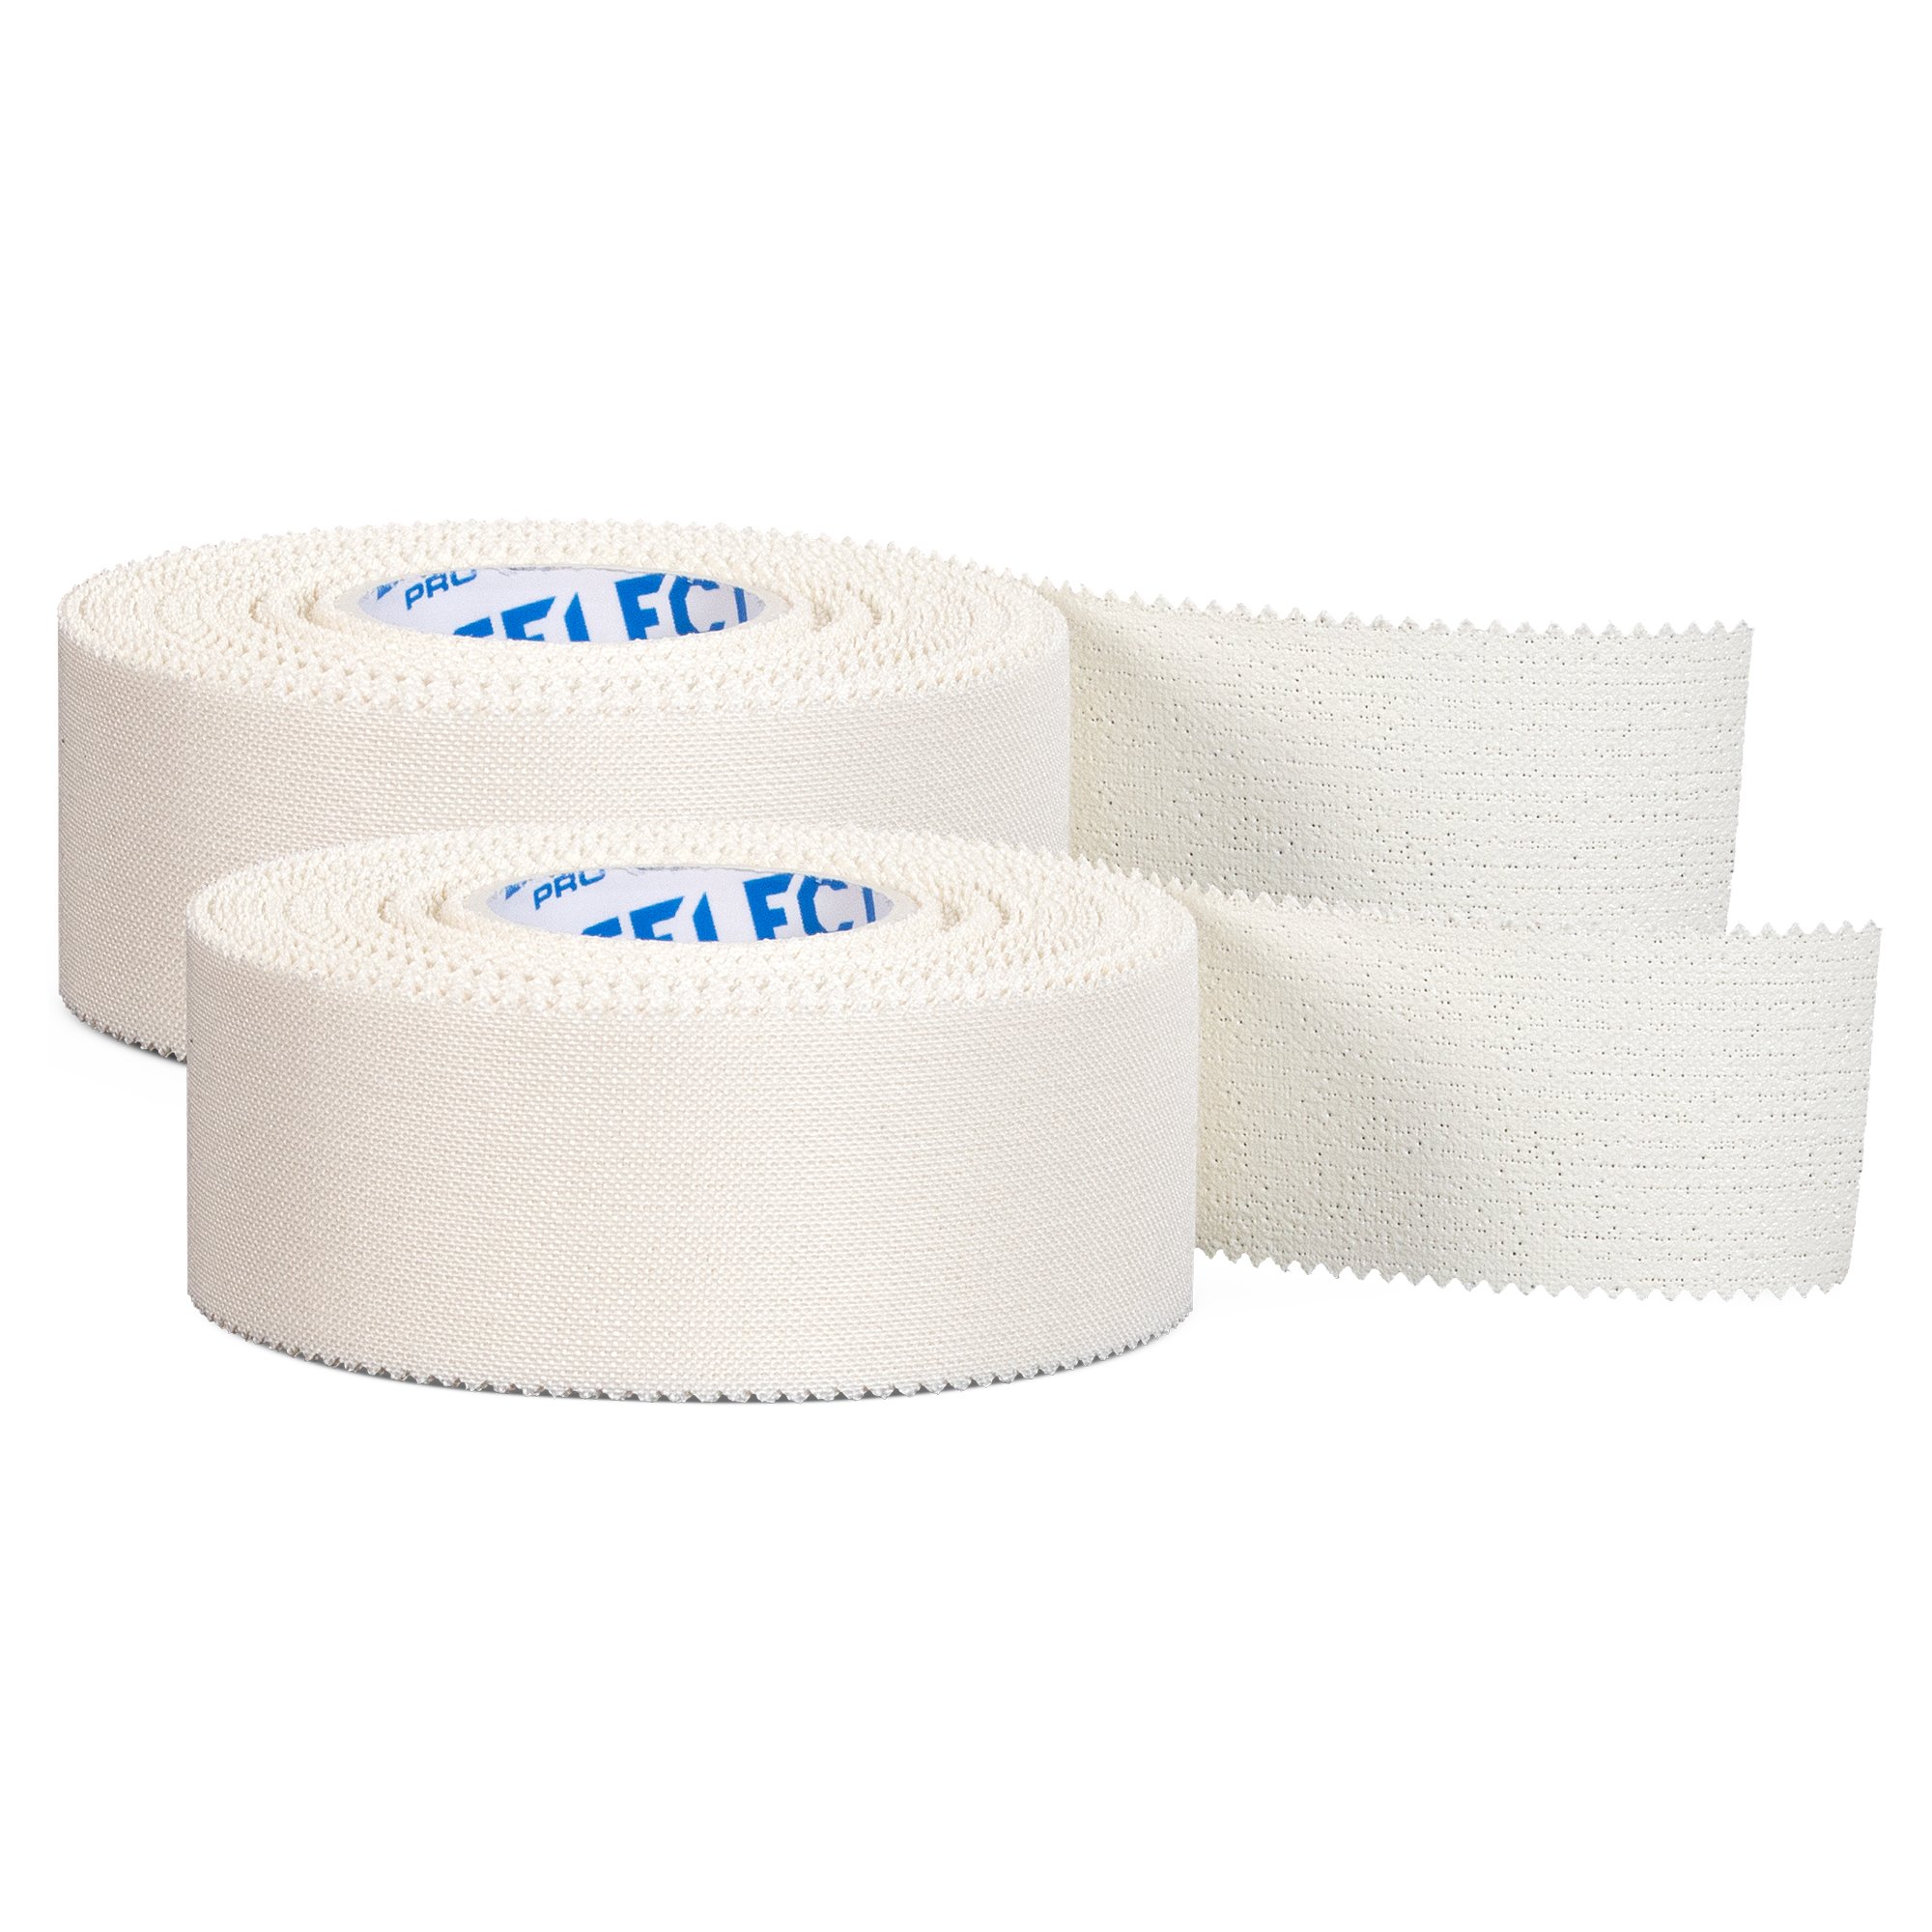 Select Pro Strap Tape II 2-pack